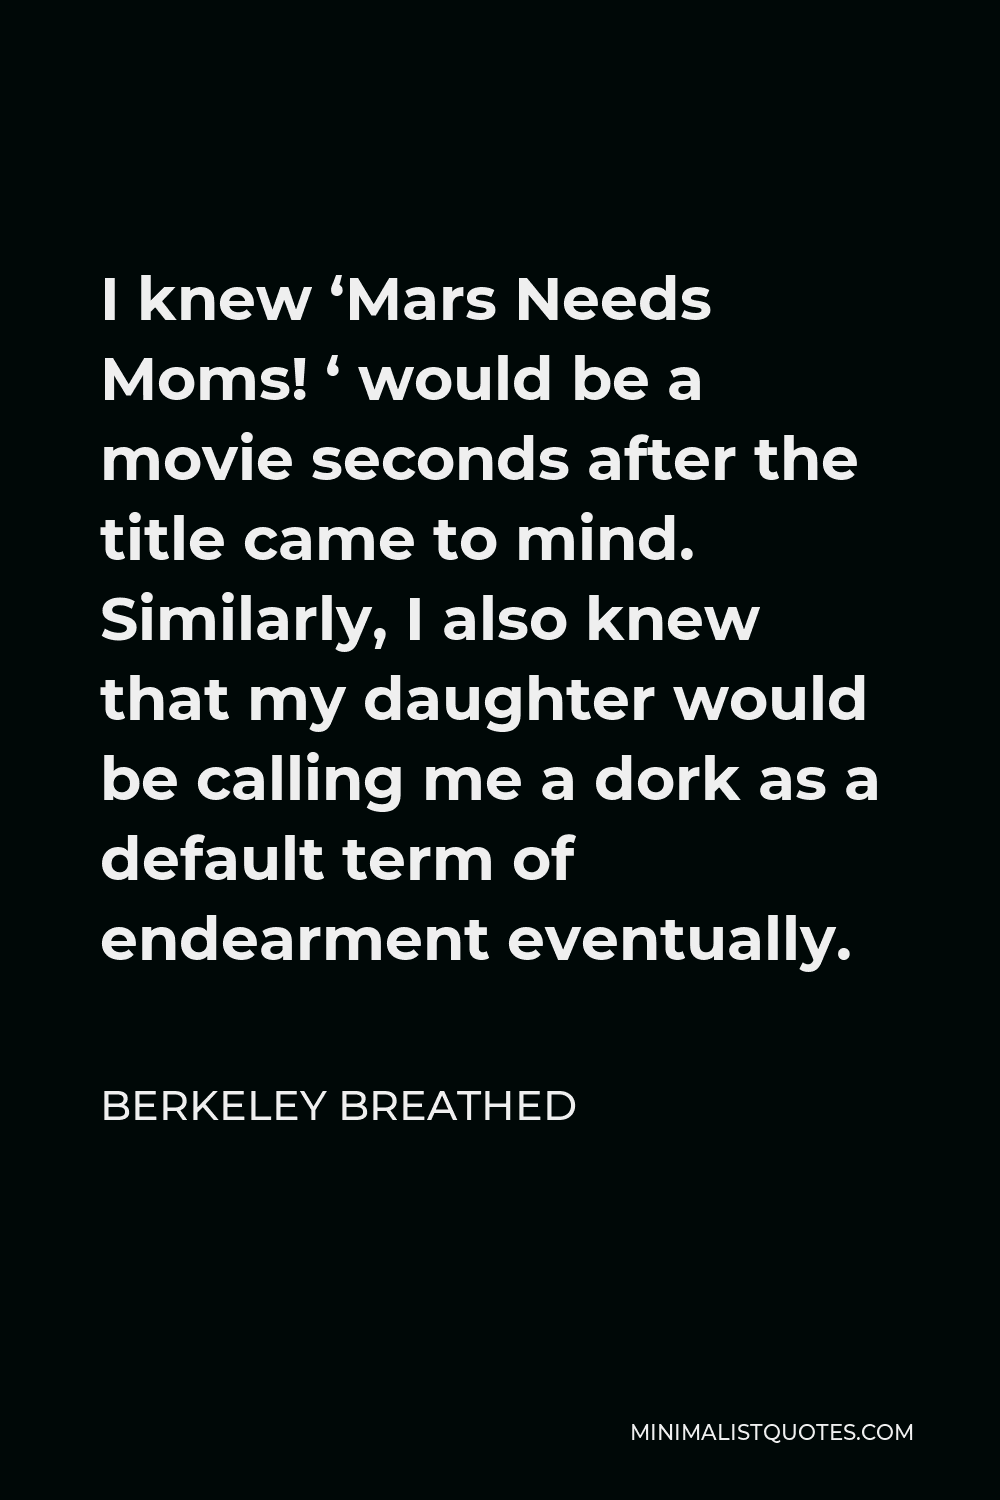 Berkeley Breathed Quote - I knew ‘Mars Needs Moms! ‘ would be a movie seconds after the title came to mind. Similarly, I also knew that my daughter would be calling me a dork as a default term of endearment eventually.